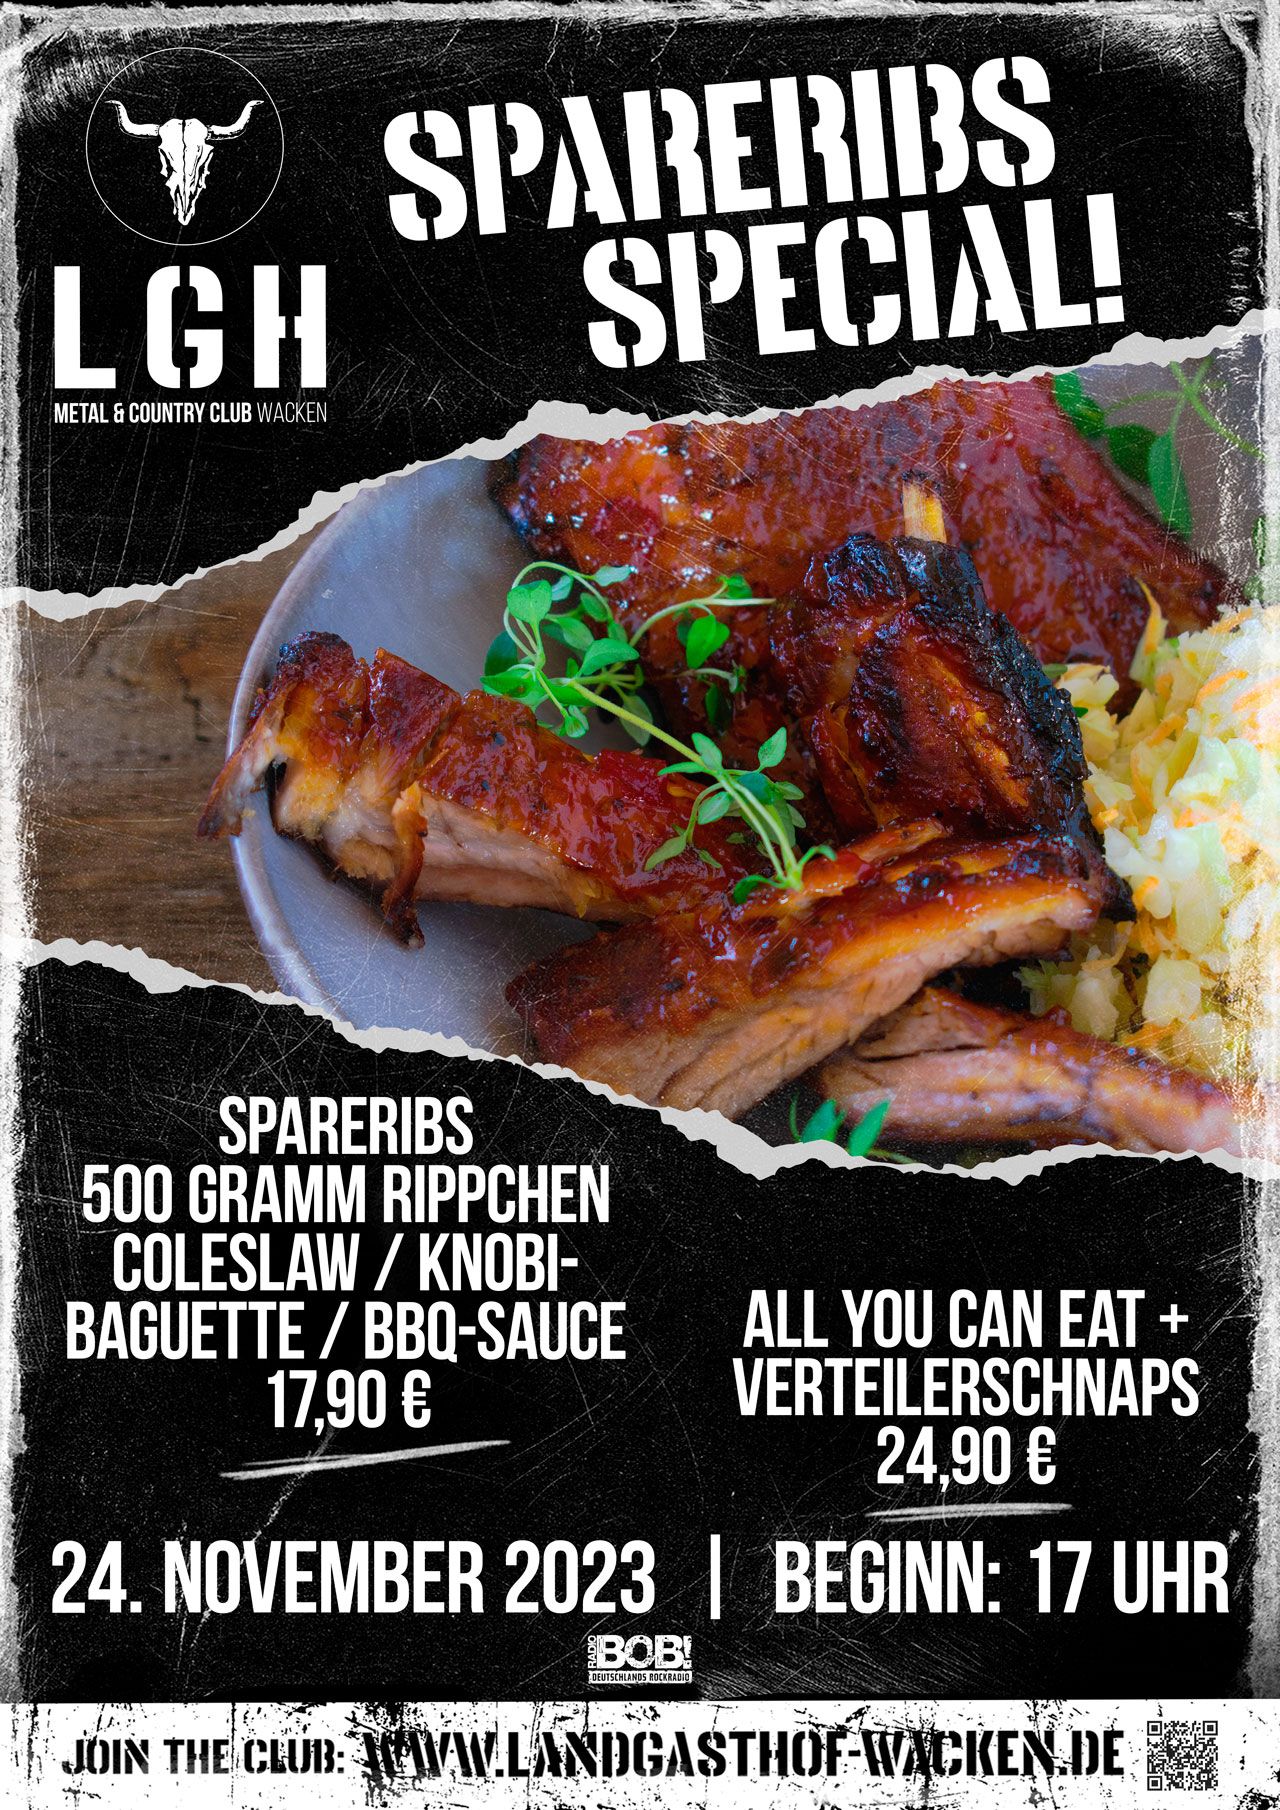 Sparerribs Special – 24.11.2023